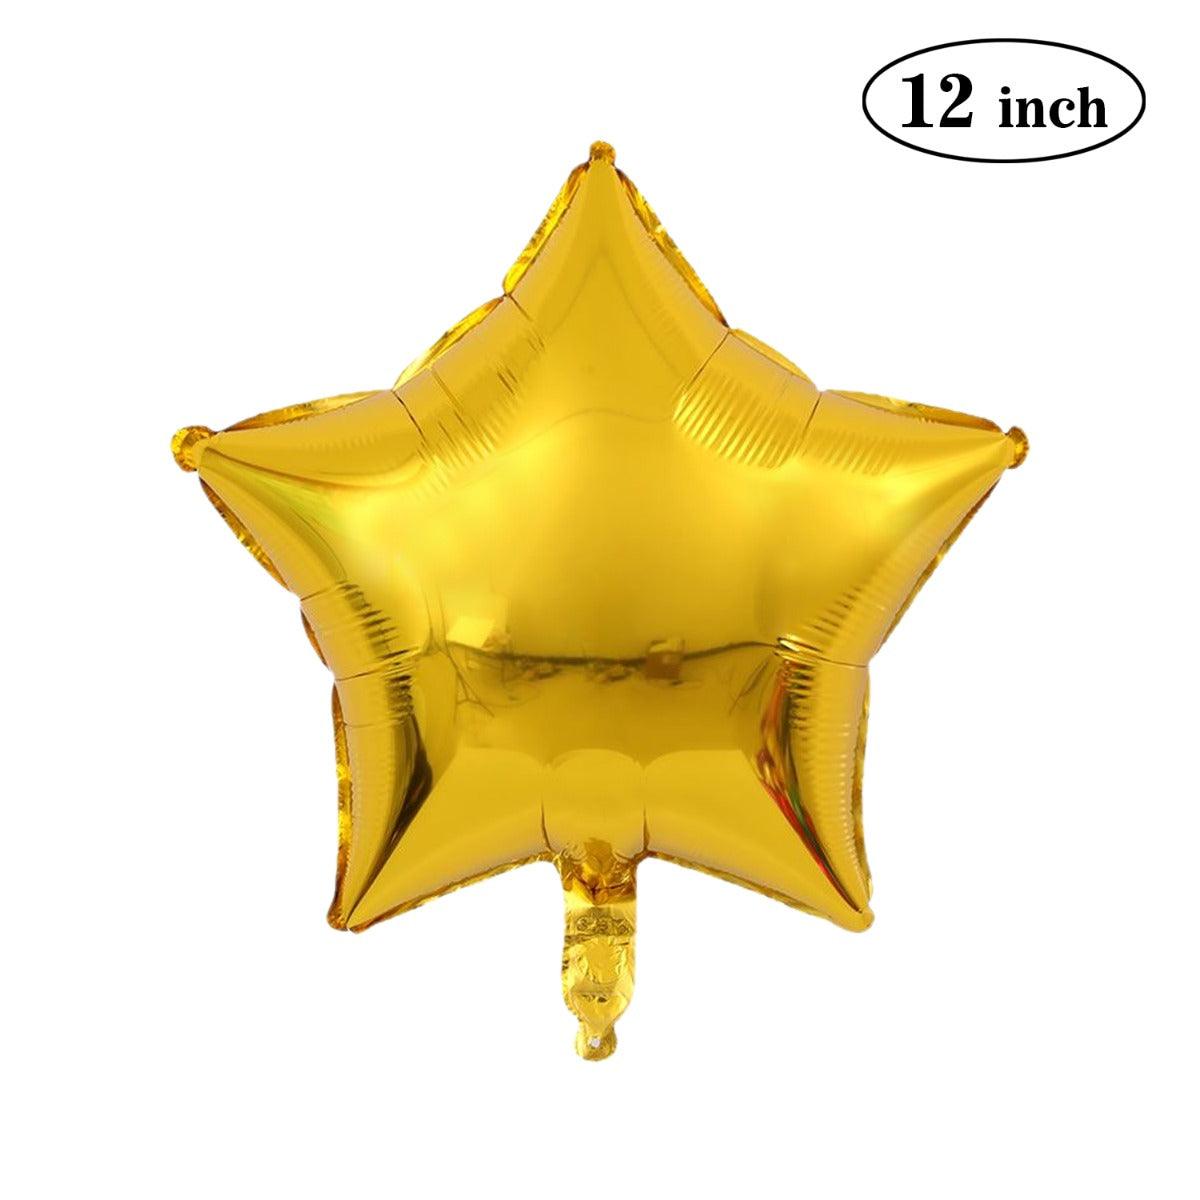 PartyCorp 12 Inch Gold Star Foil Balloon, 1 pc